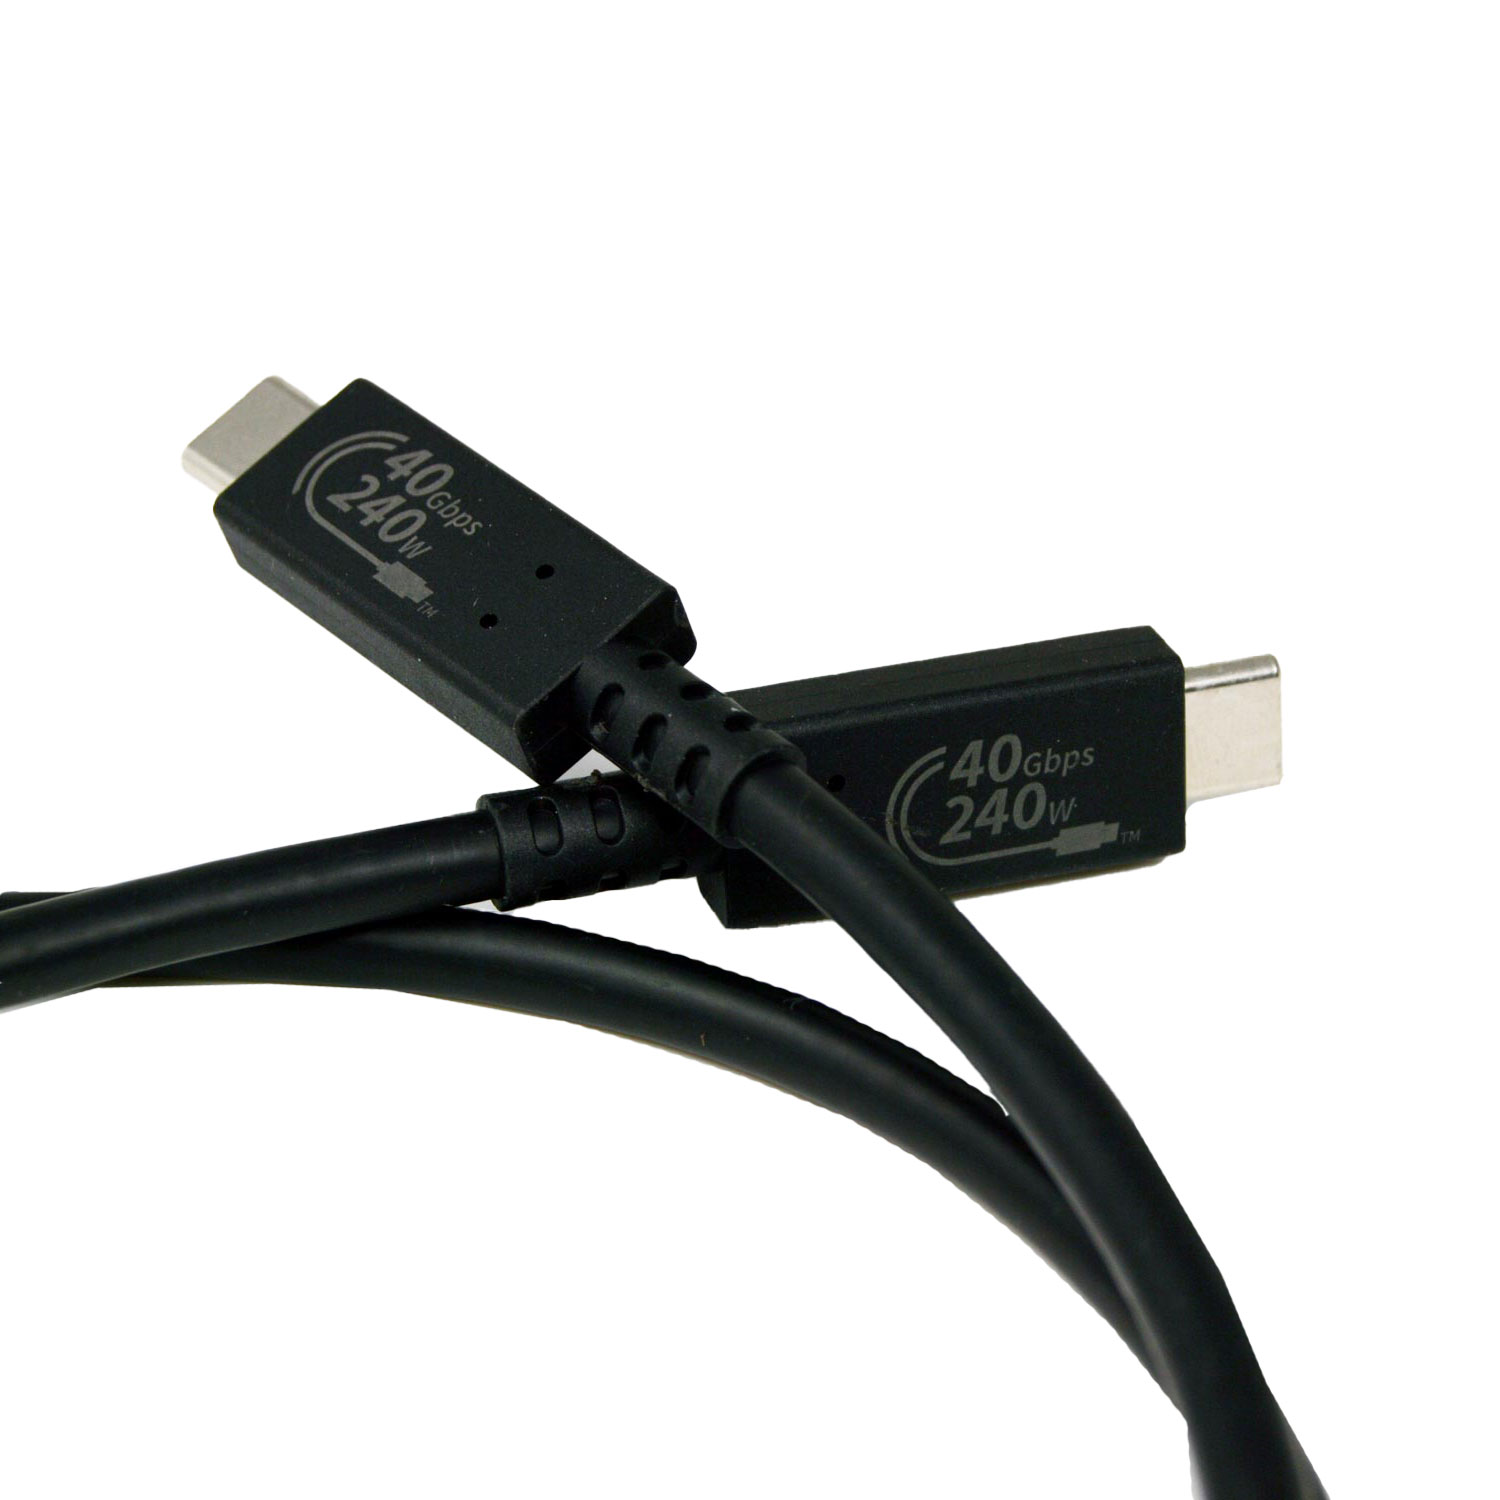 the part number is KMCX-USB4.0-MTOM-1M